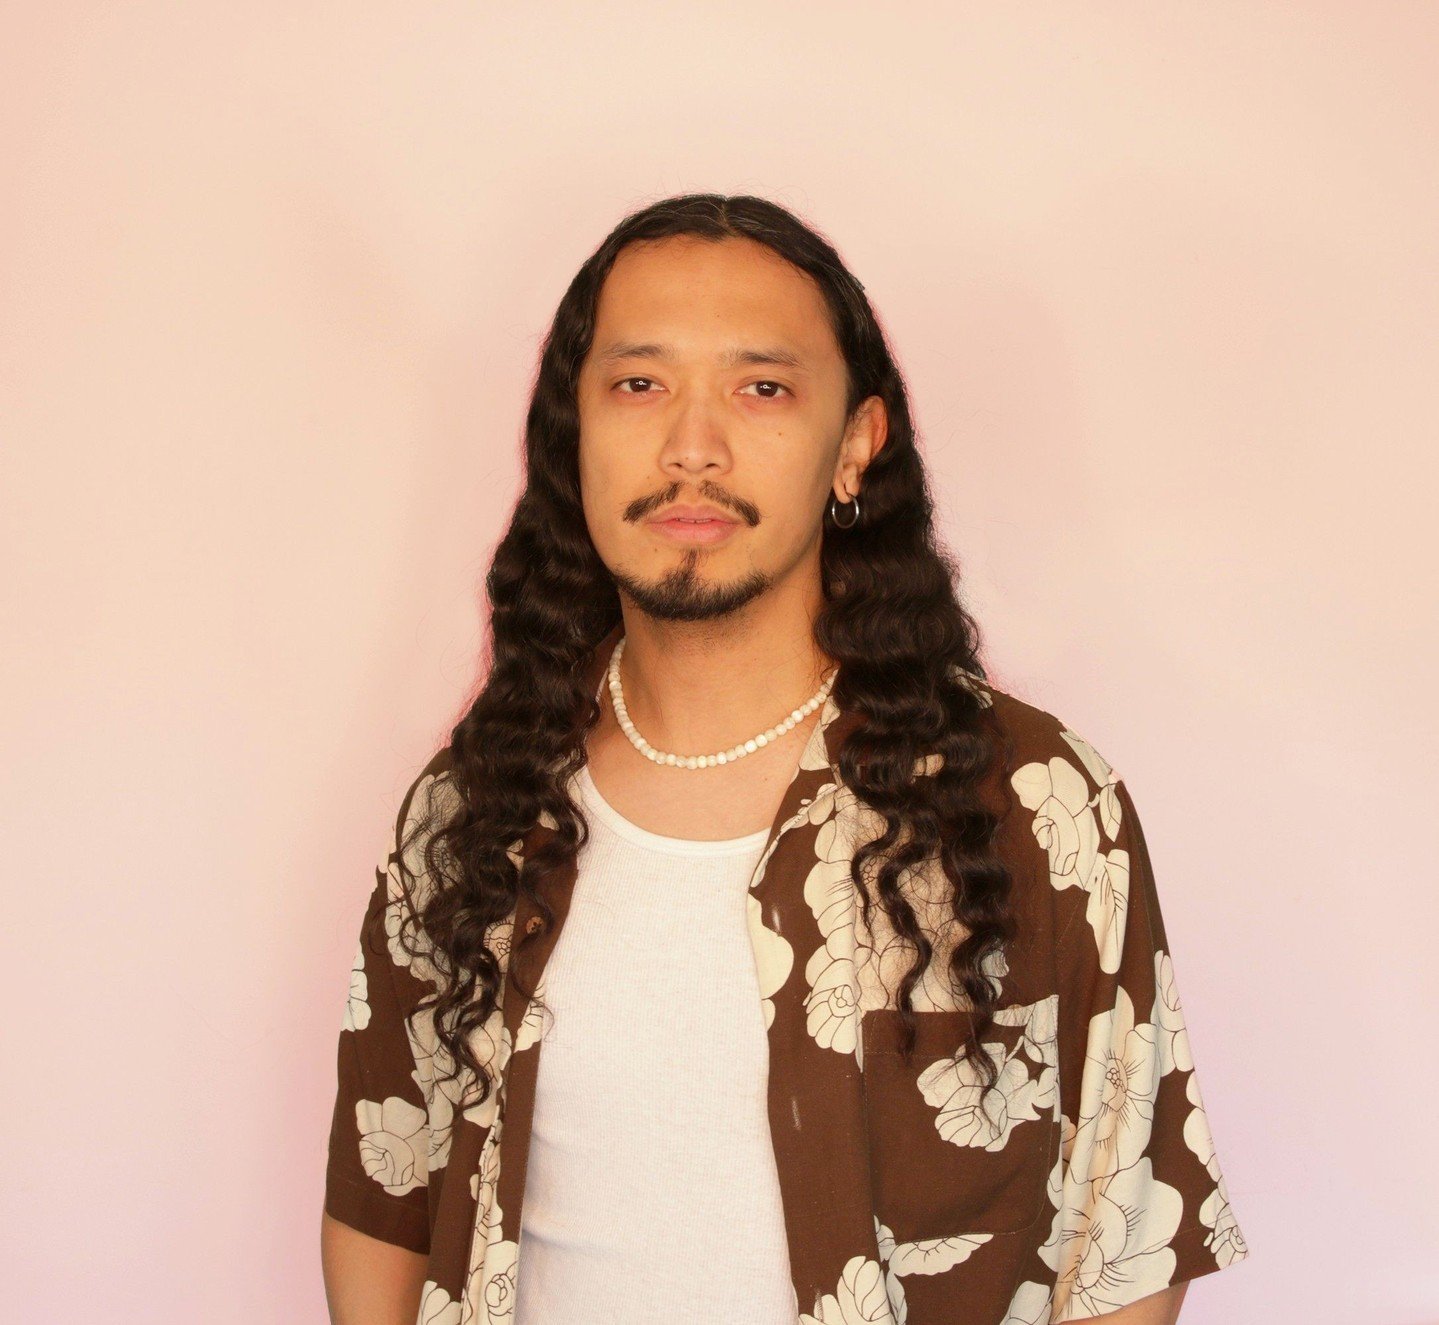 Jeromy Velasco @jeromyvelasco is a queer Filipinx (and left-handed!) artist and proud Angeleno whose illustrations, animations, prints and installations have blown us away since we curated their work for Santa Monica Pride years ago. Inspired by 90's